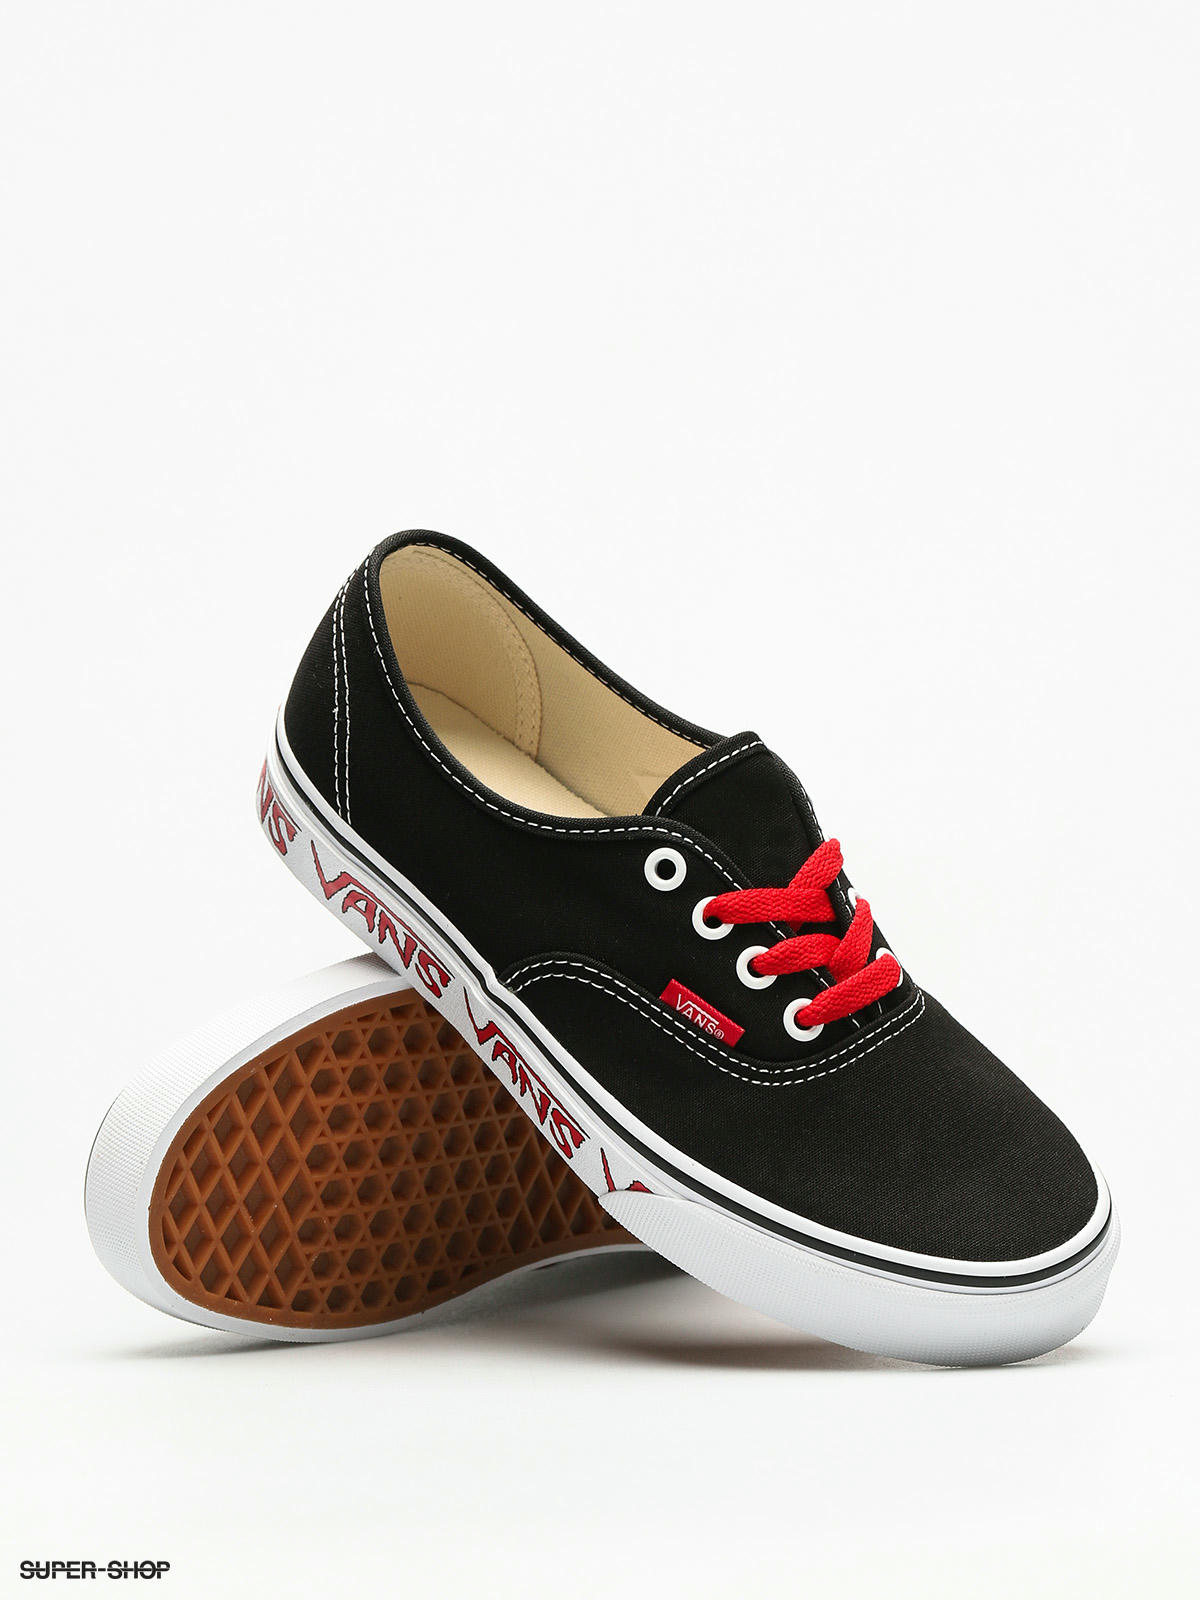 Skateboarding Shoes Red, C Red Skateboard Shoes